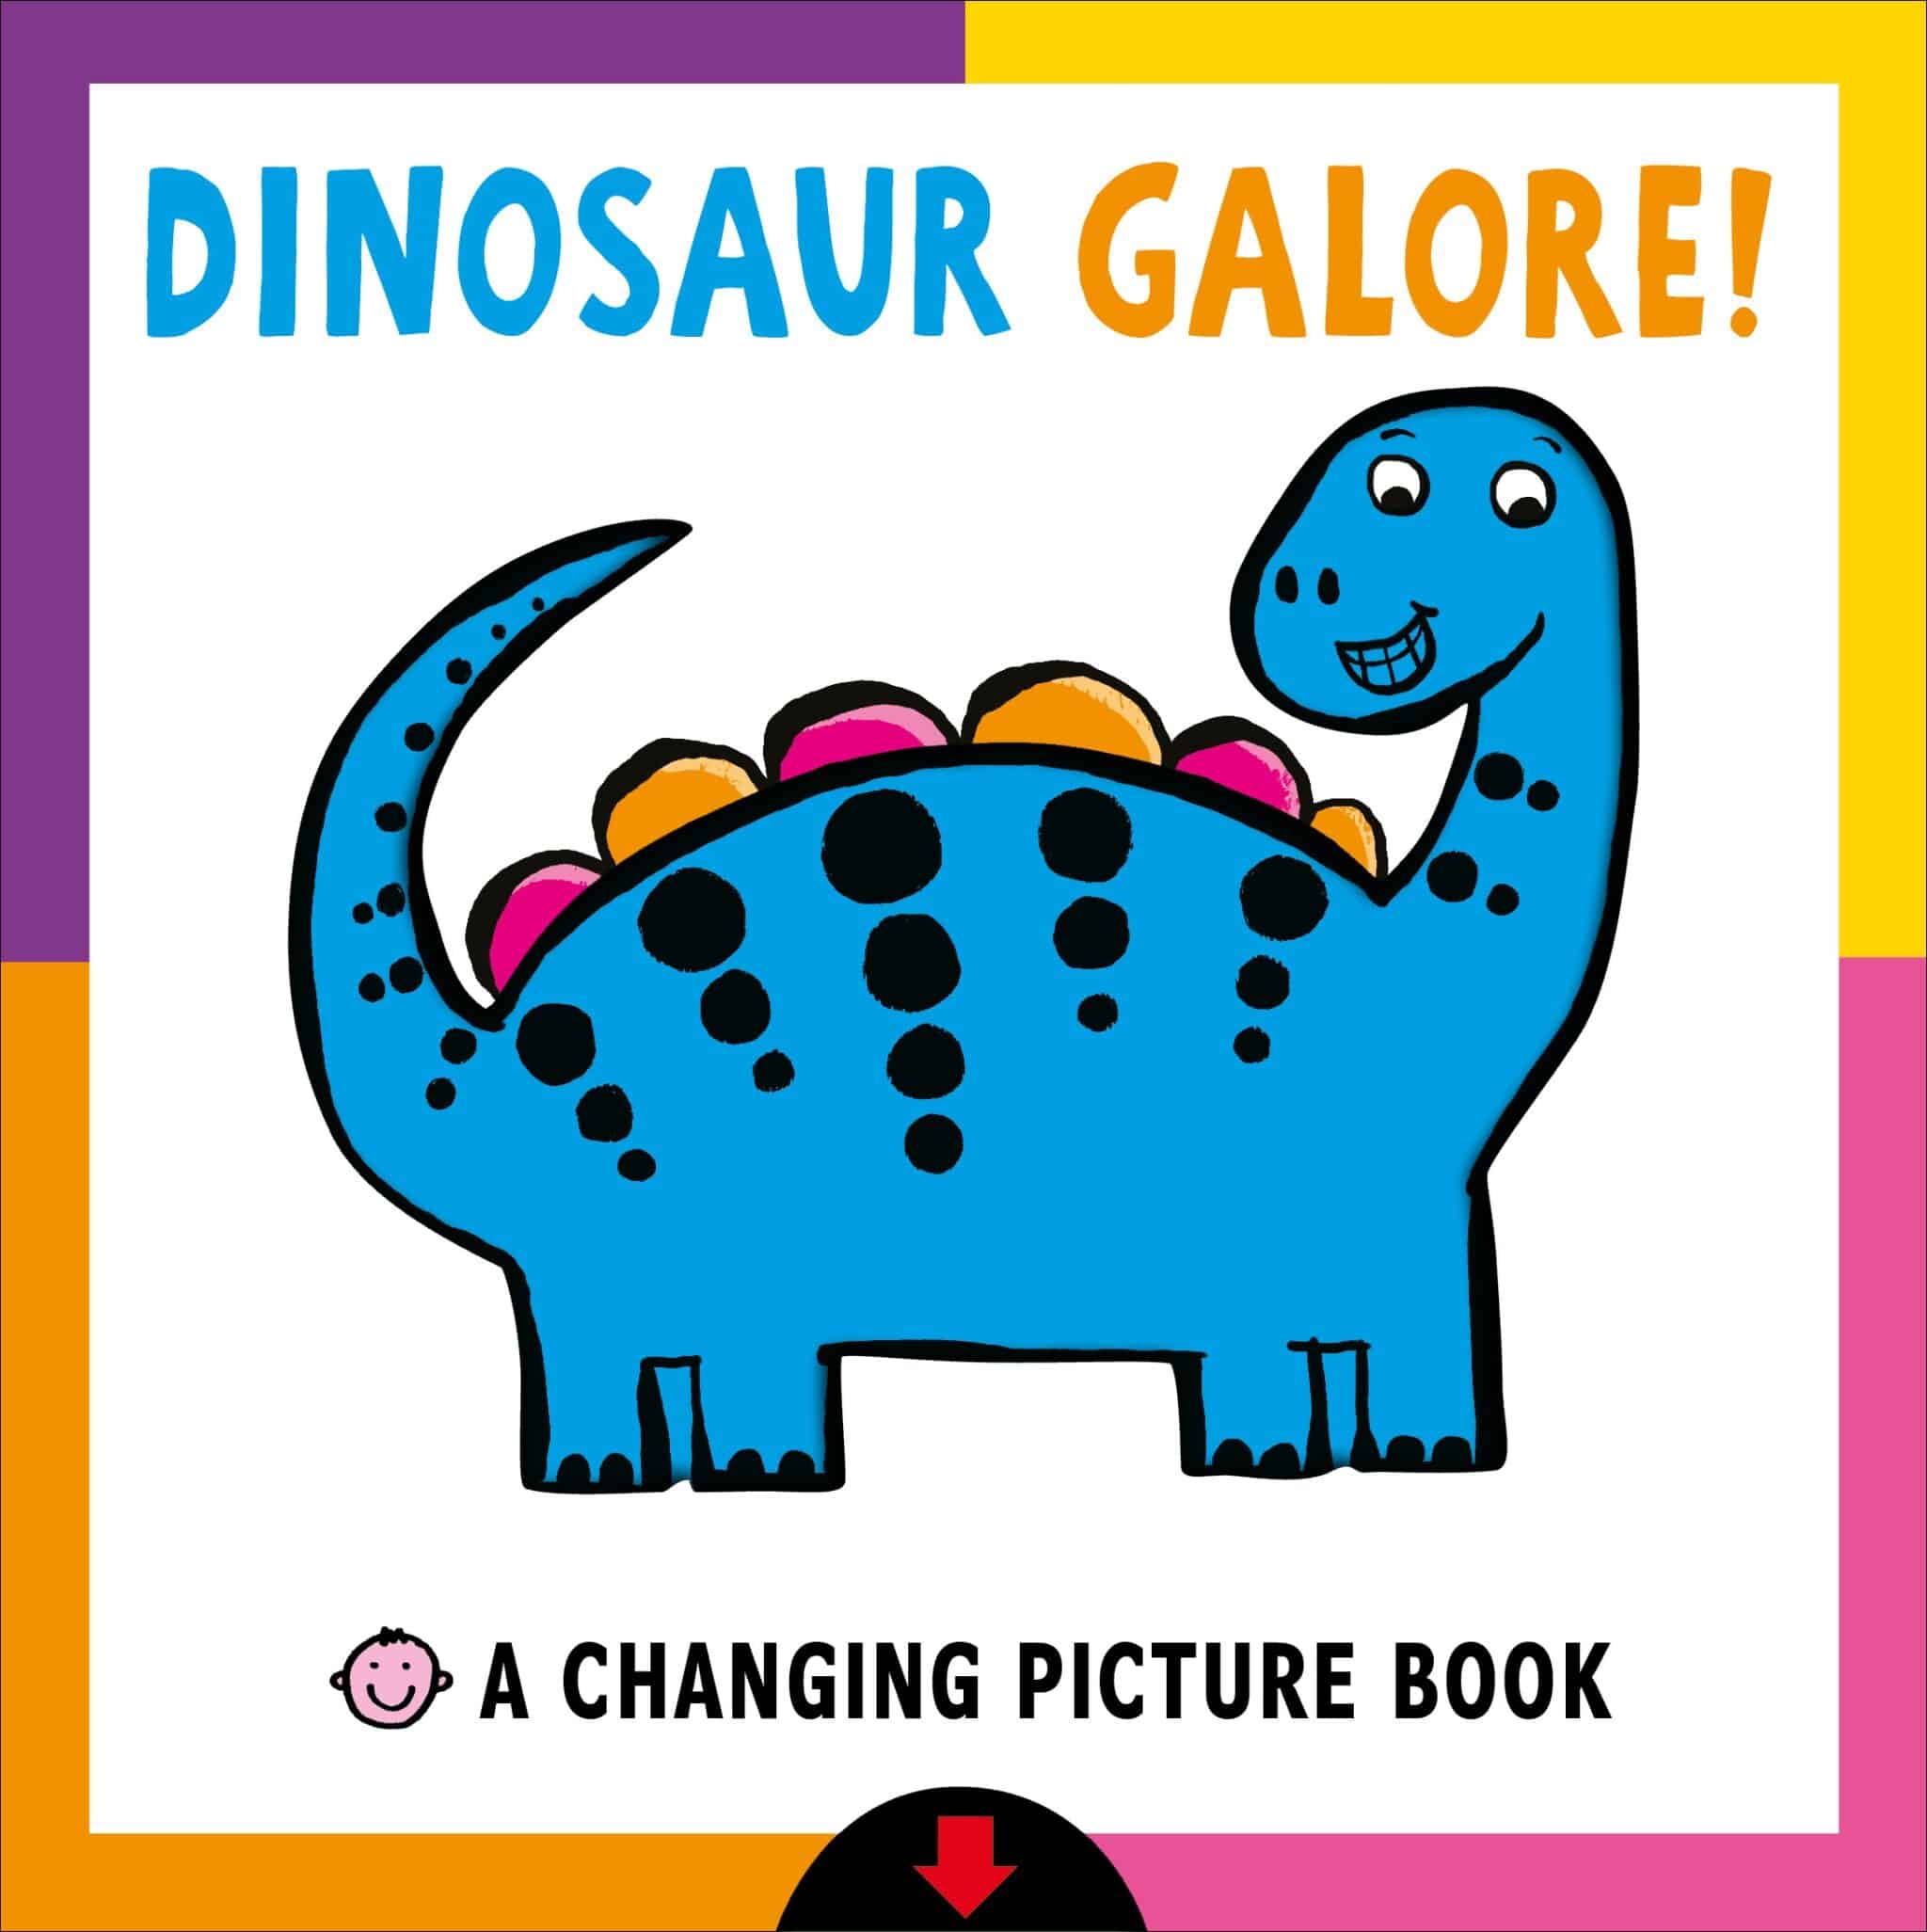 changing-picture-book-dinosaur-galore_1239258.jpg